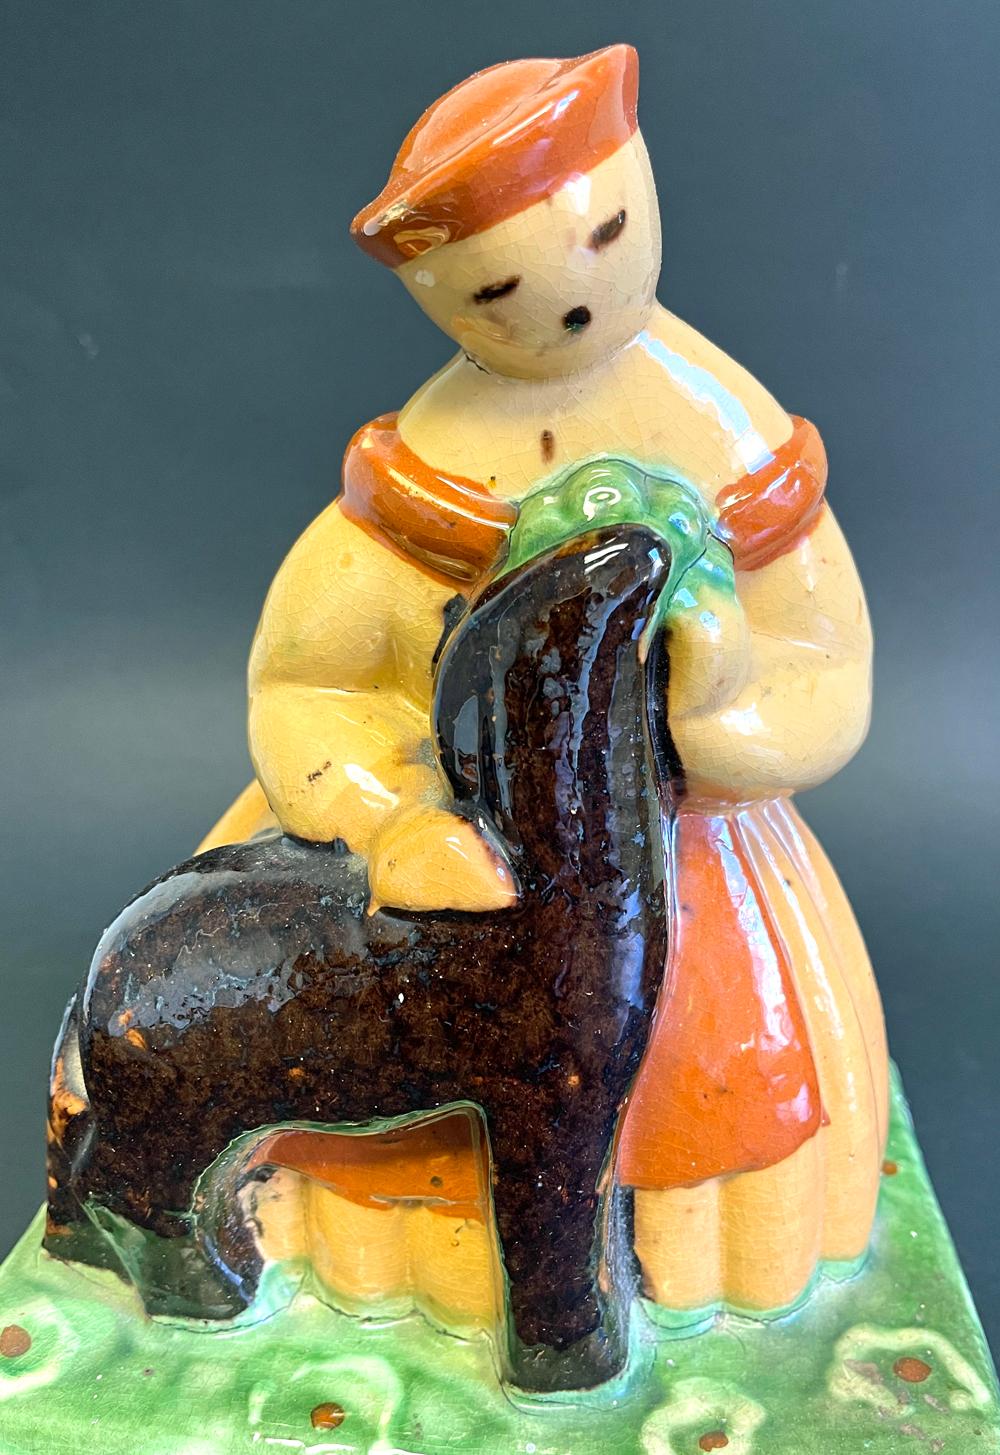 Brilliantly glazed in hues of dark pumpkin, emerald green and ruddy putty, this unique ceramic sculpture of a shepherdess in a wide, pleated skirt embracing one of her lambs was created by the famed Primavera workshop, established by Le Printemps